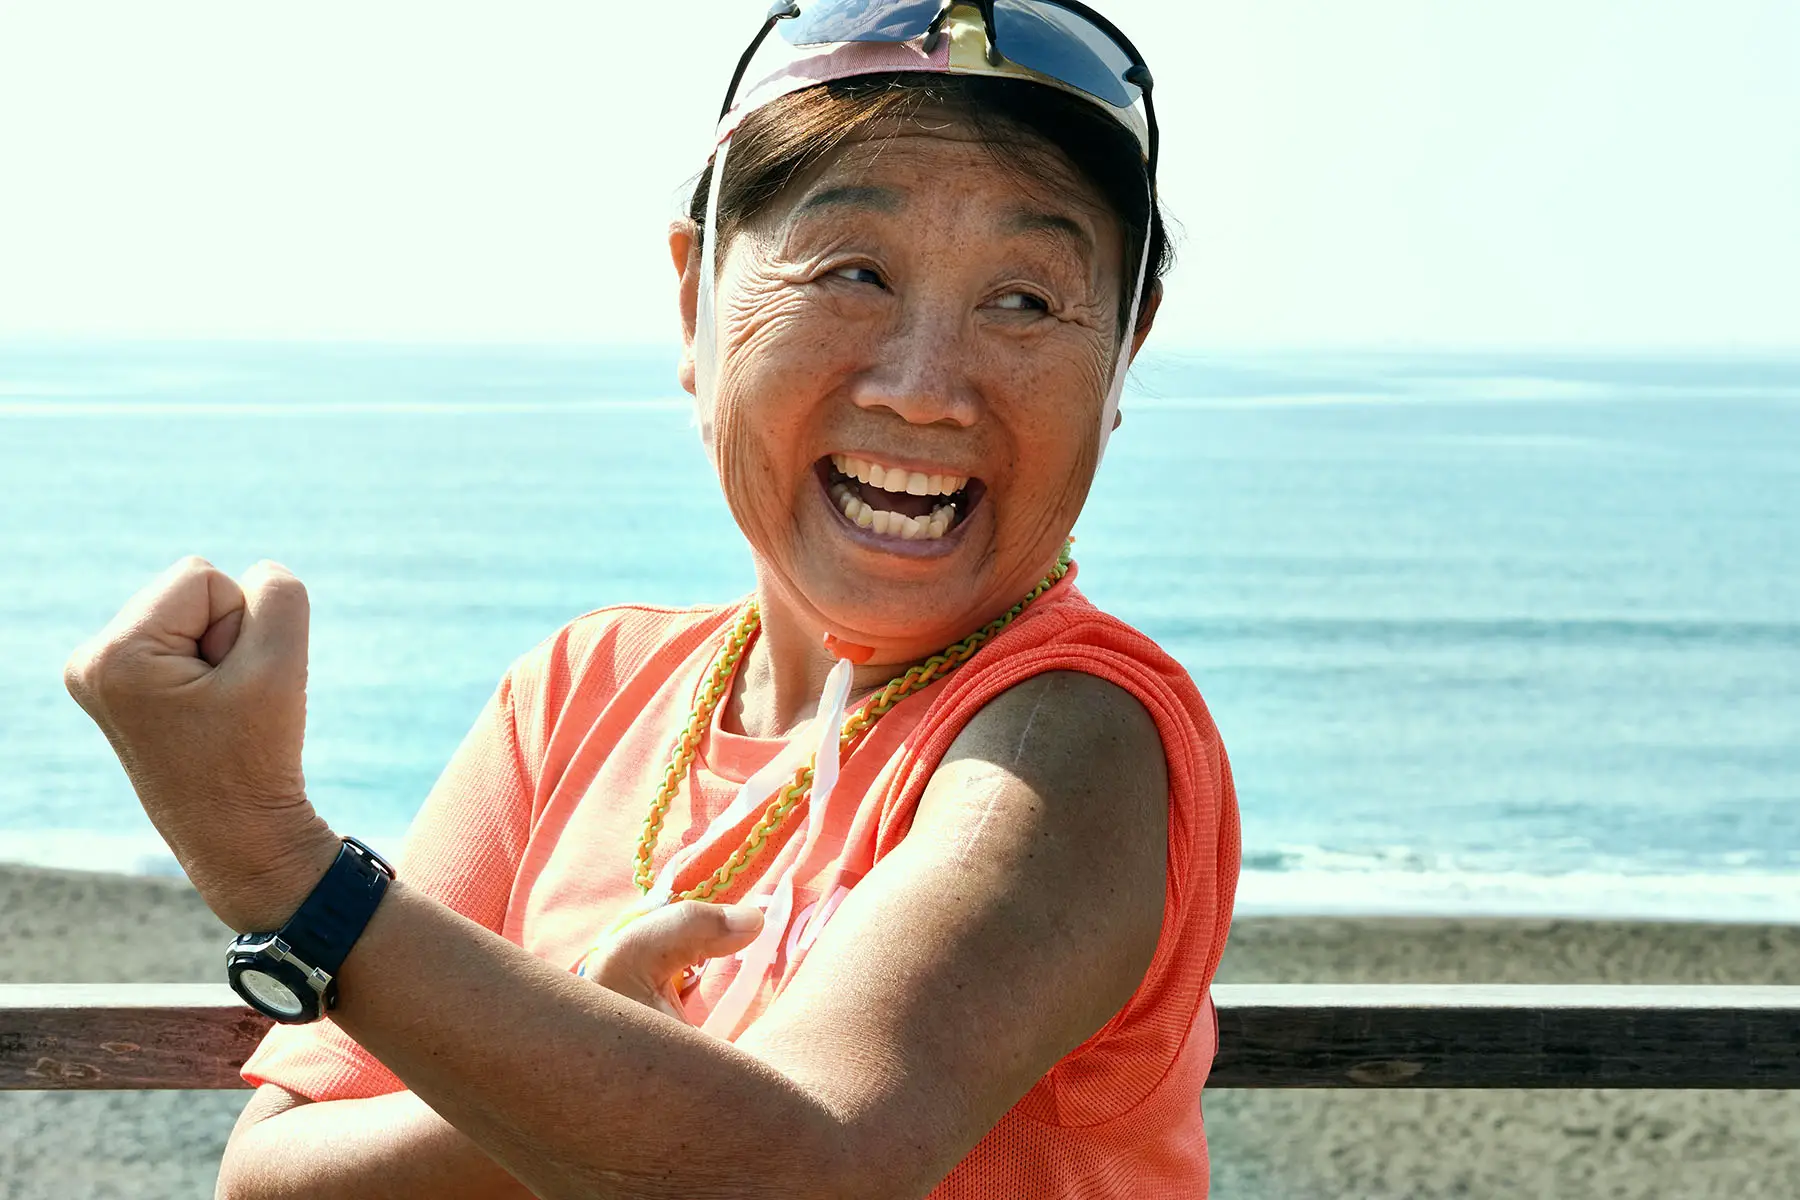 Person is laughing and showing their muscles while near the beach.